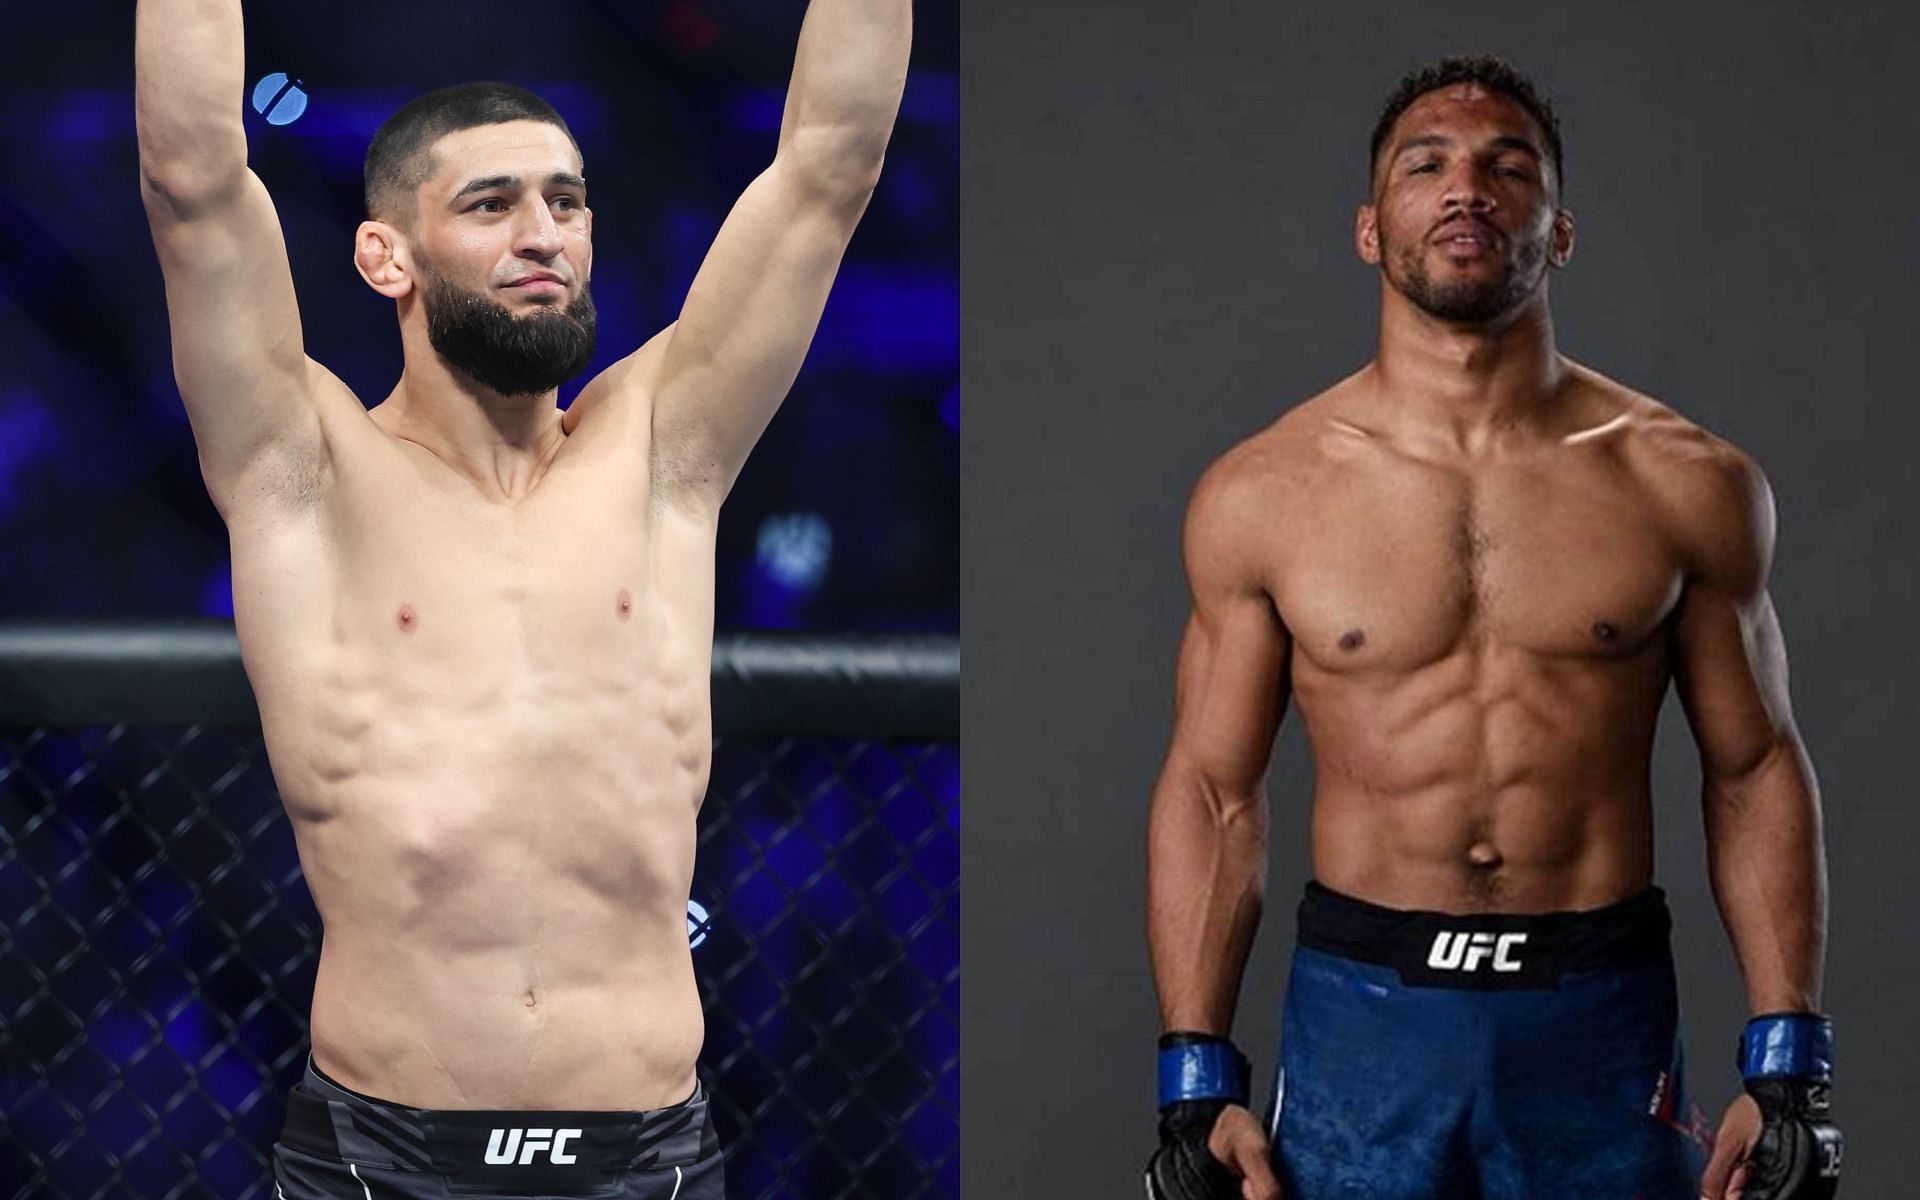 Khamzat Chimaev (left) and Kevin Lee (right) [Image Courtesy: Getty Images and @motownphenom on Instagram]